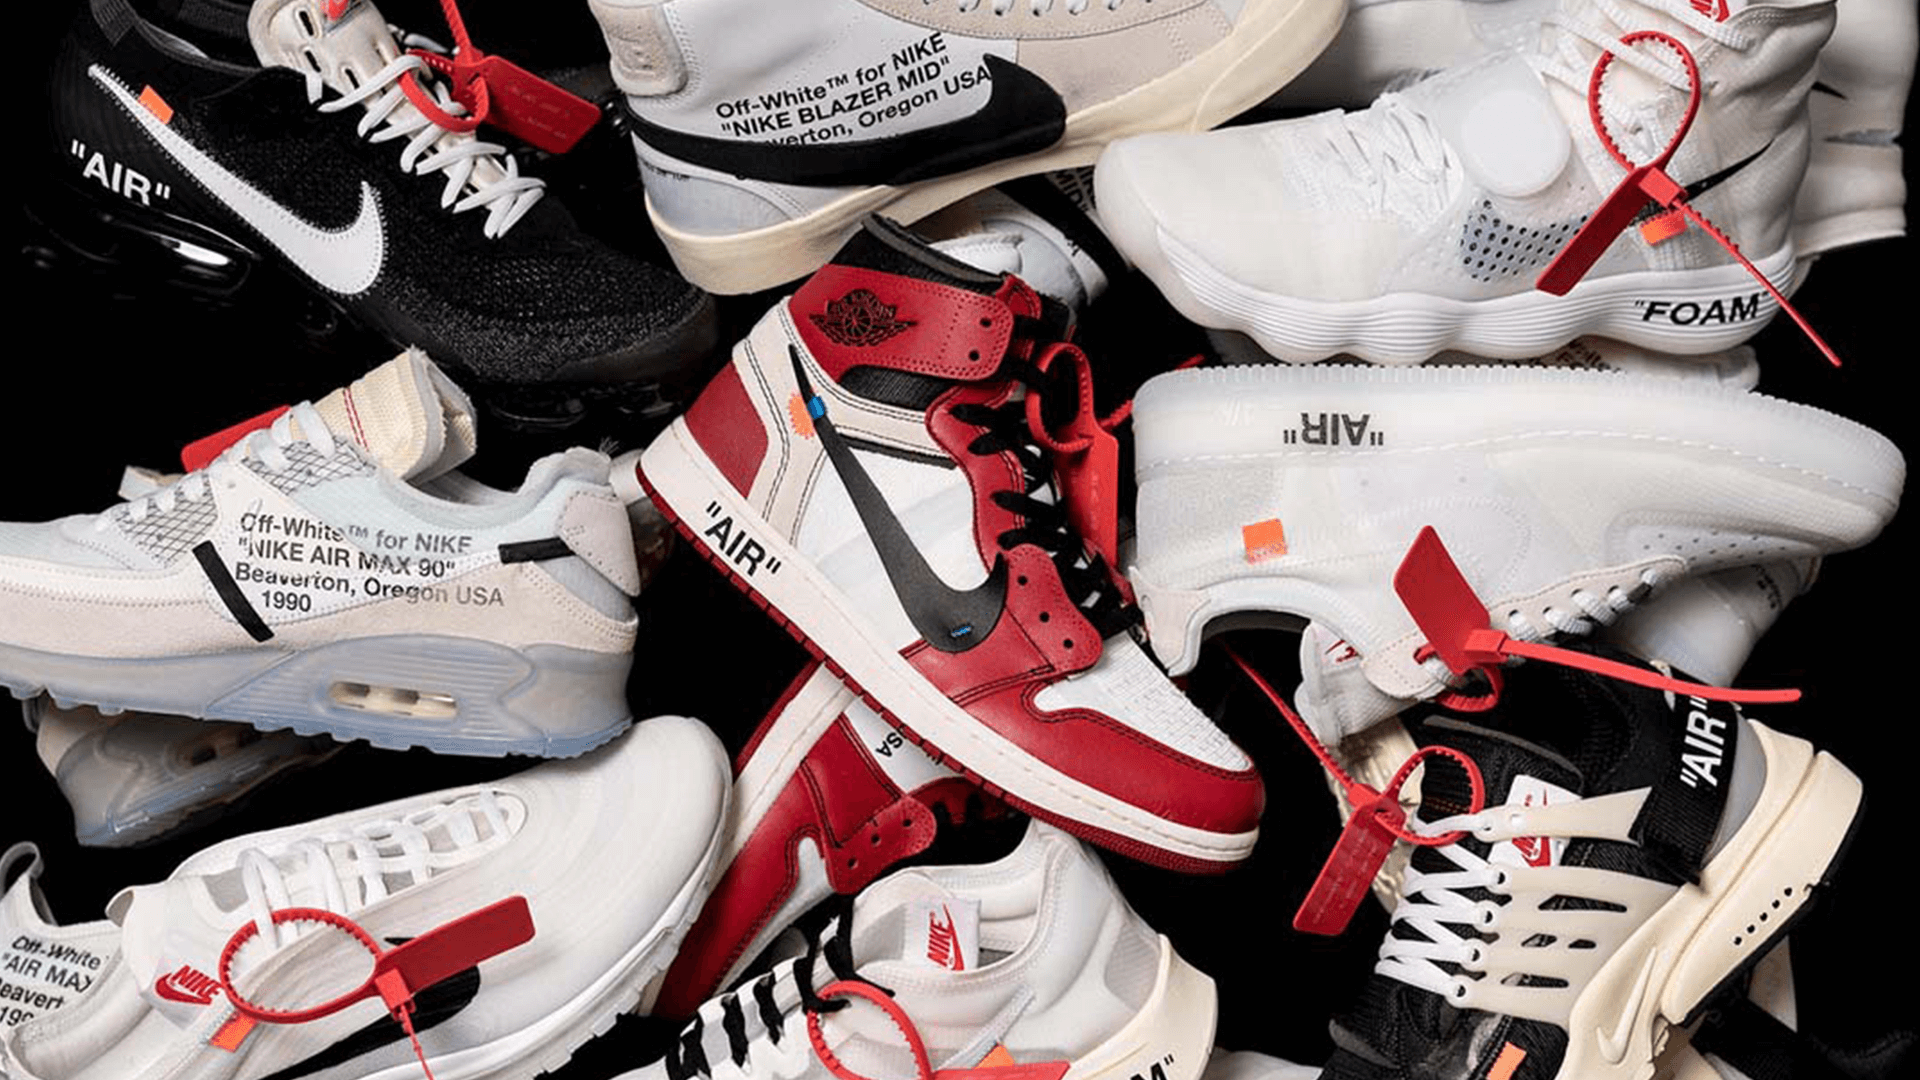 Latest Off White X Nike Trainer Releases & Next Drops. The Sole Supplier